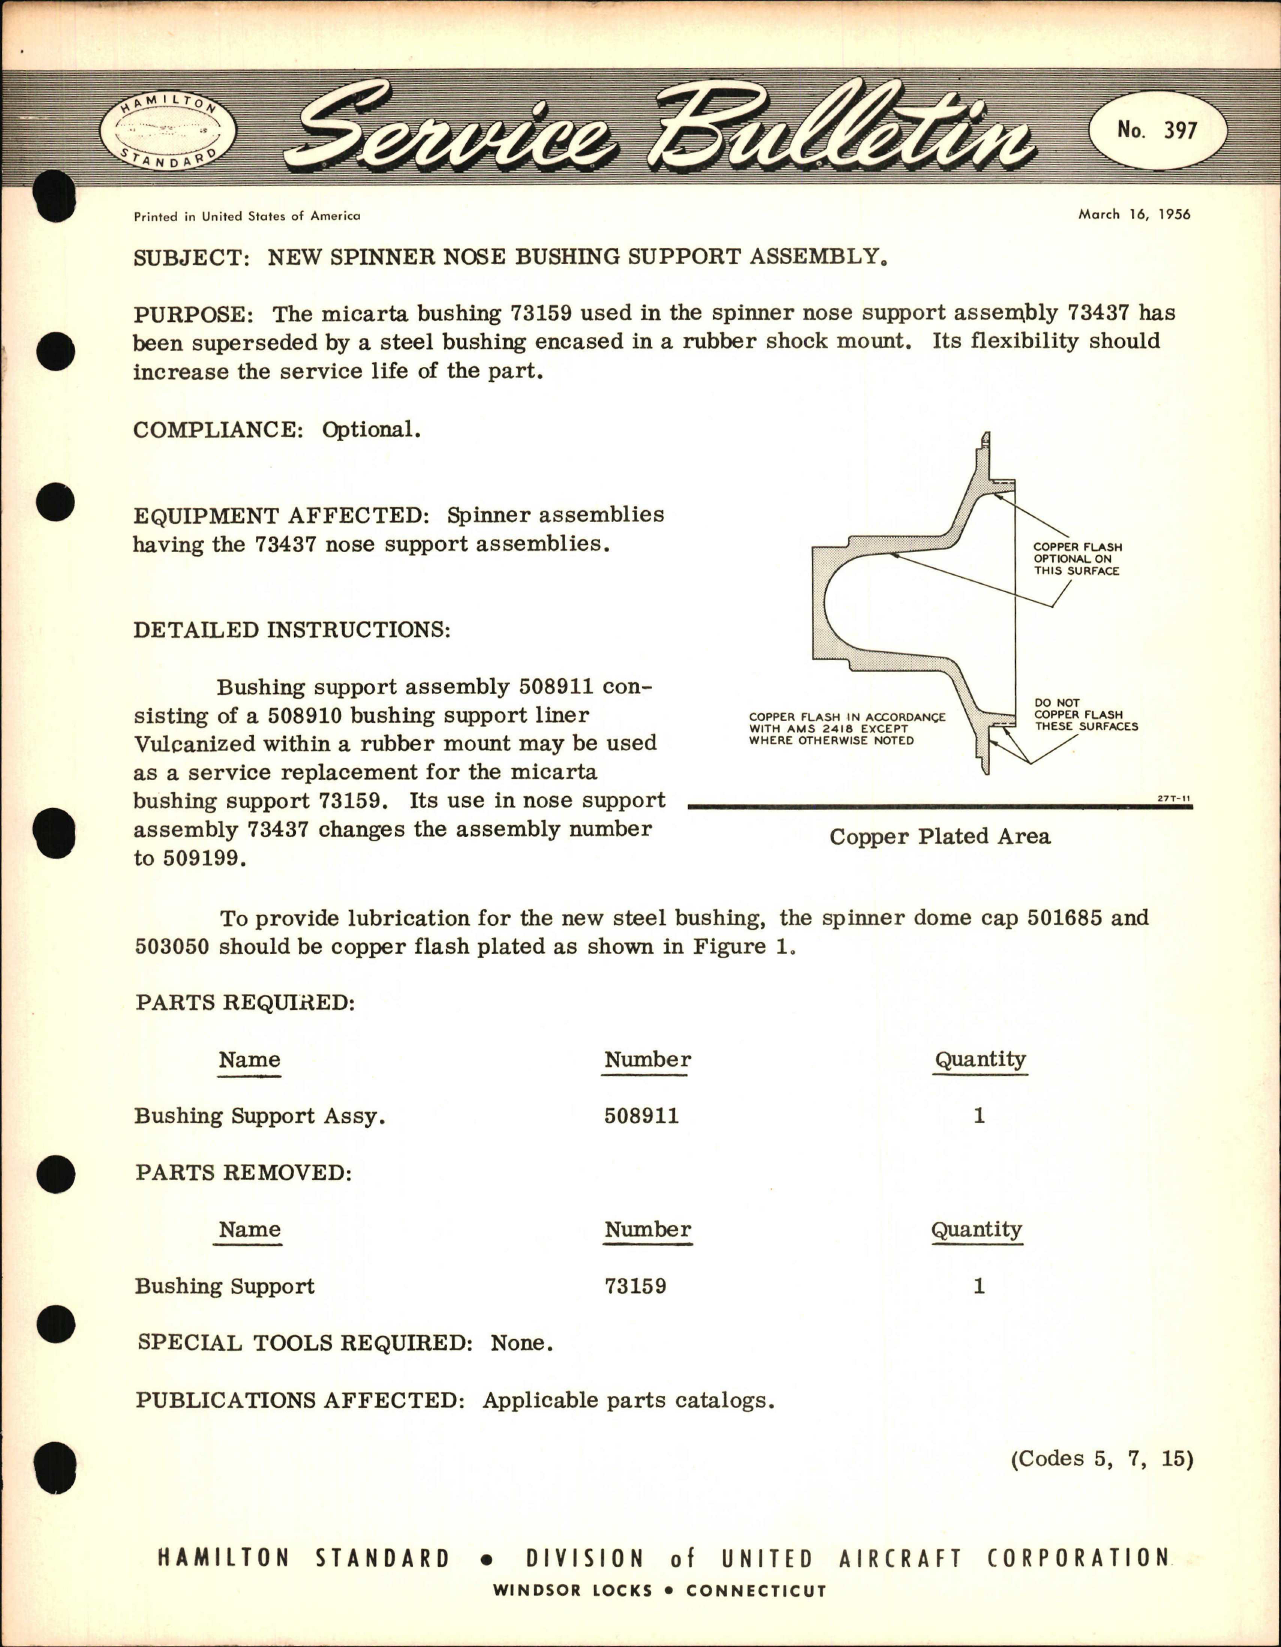 Sample page 1 from AirCorps Library document: New Spinner Nose Brushing Support Assembly